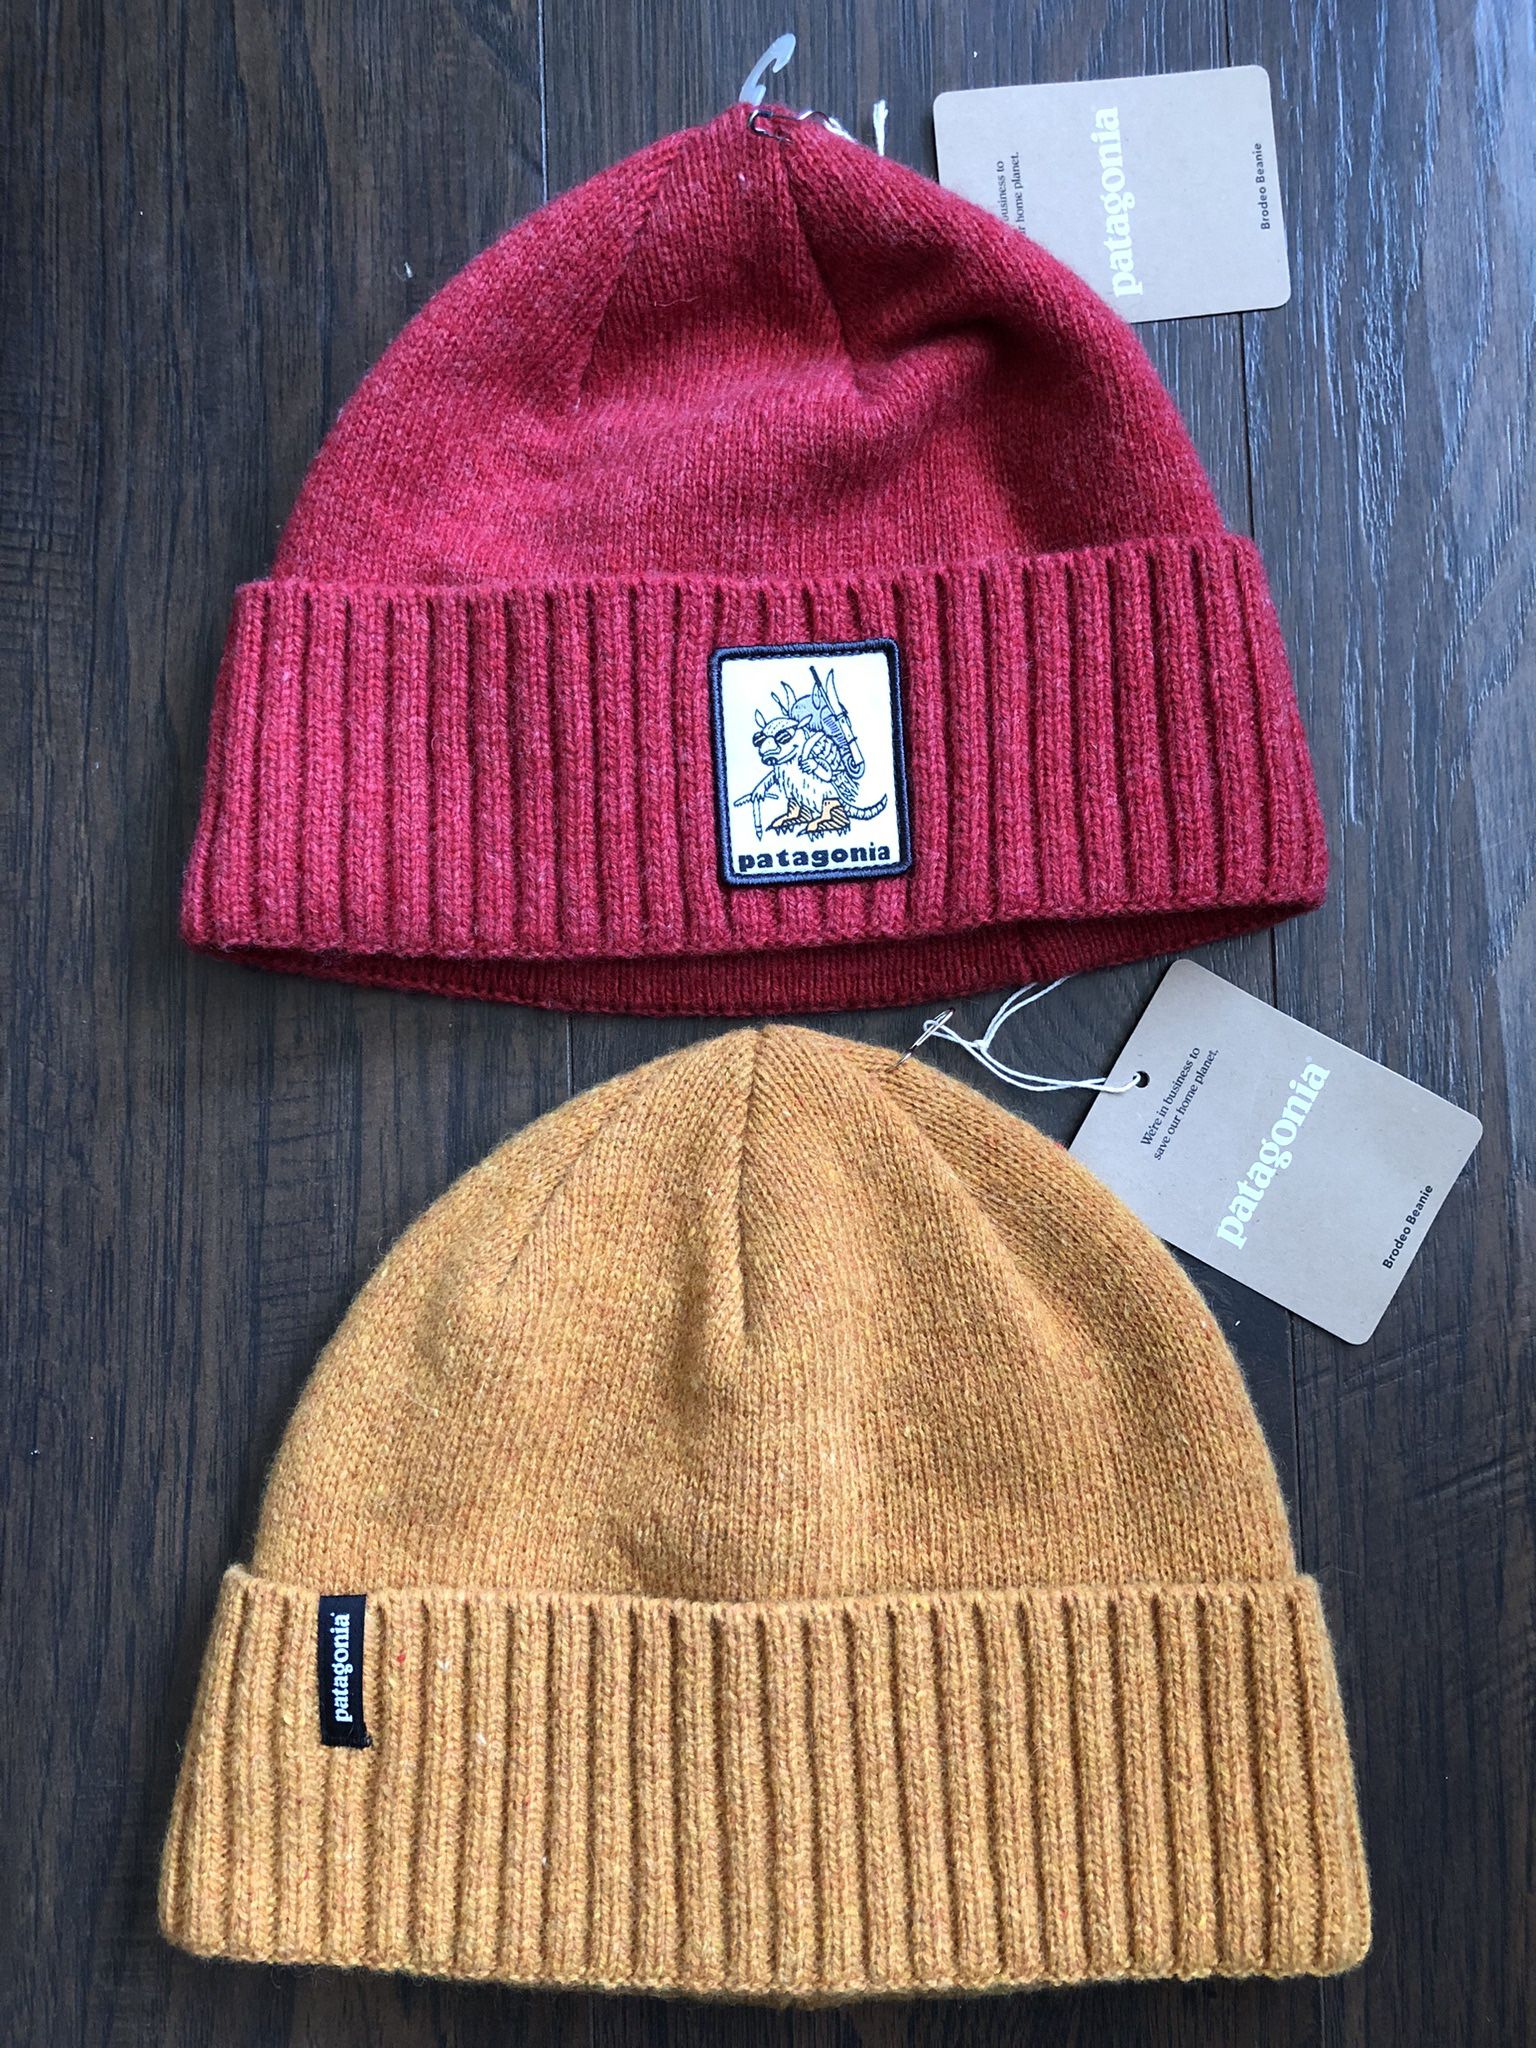 Patagonia Beanies New With Tags Beanie Selling Both For $40